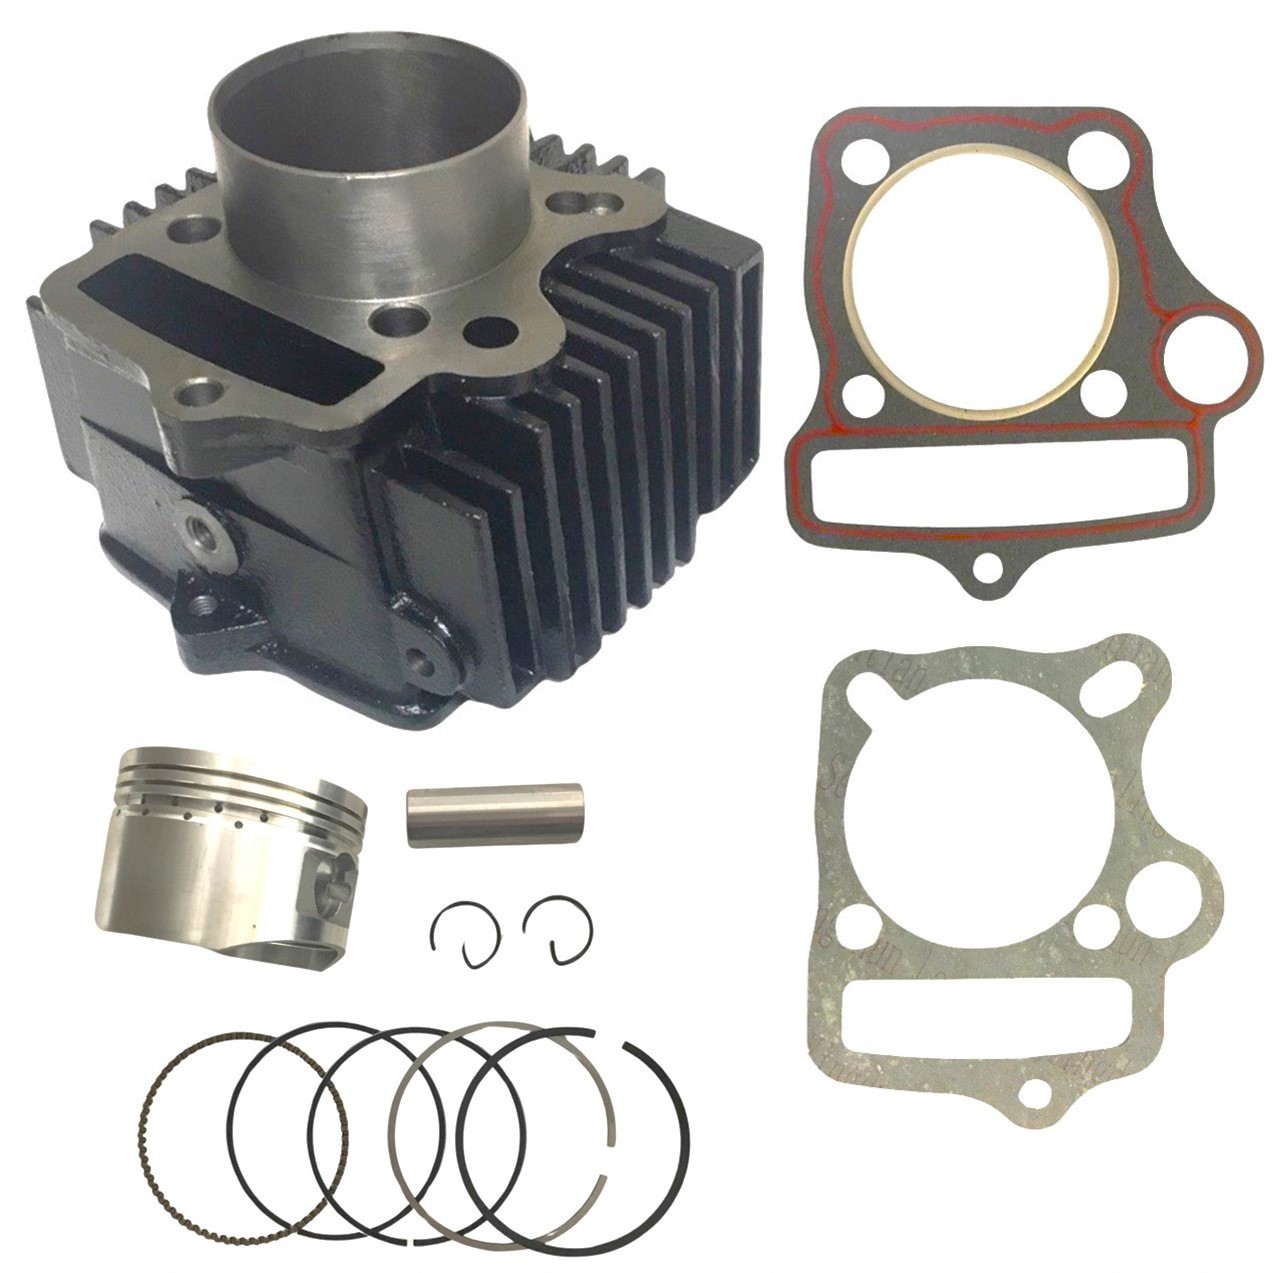 Cylinder Piston Top End Kit 125cc 4 Stroke ATVs-Dirtbikes B=54mm, H=69mm - Click Image to Close